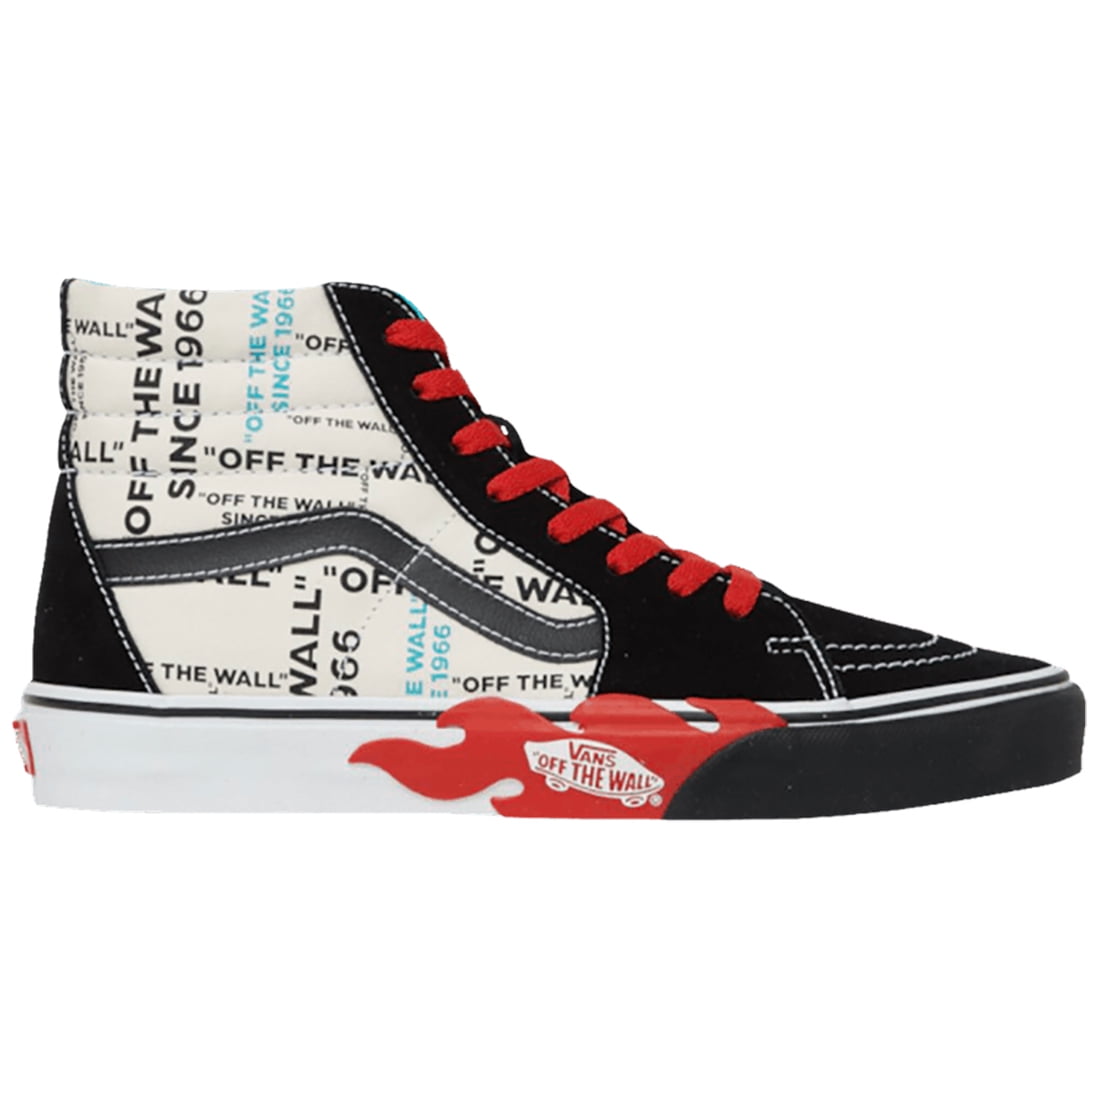 vans off the wall shoes women